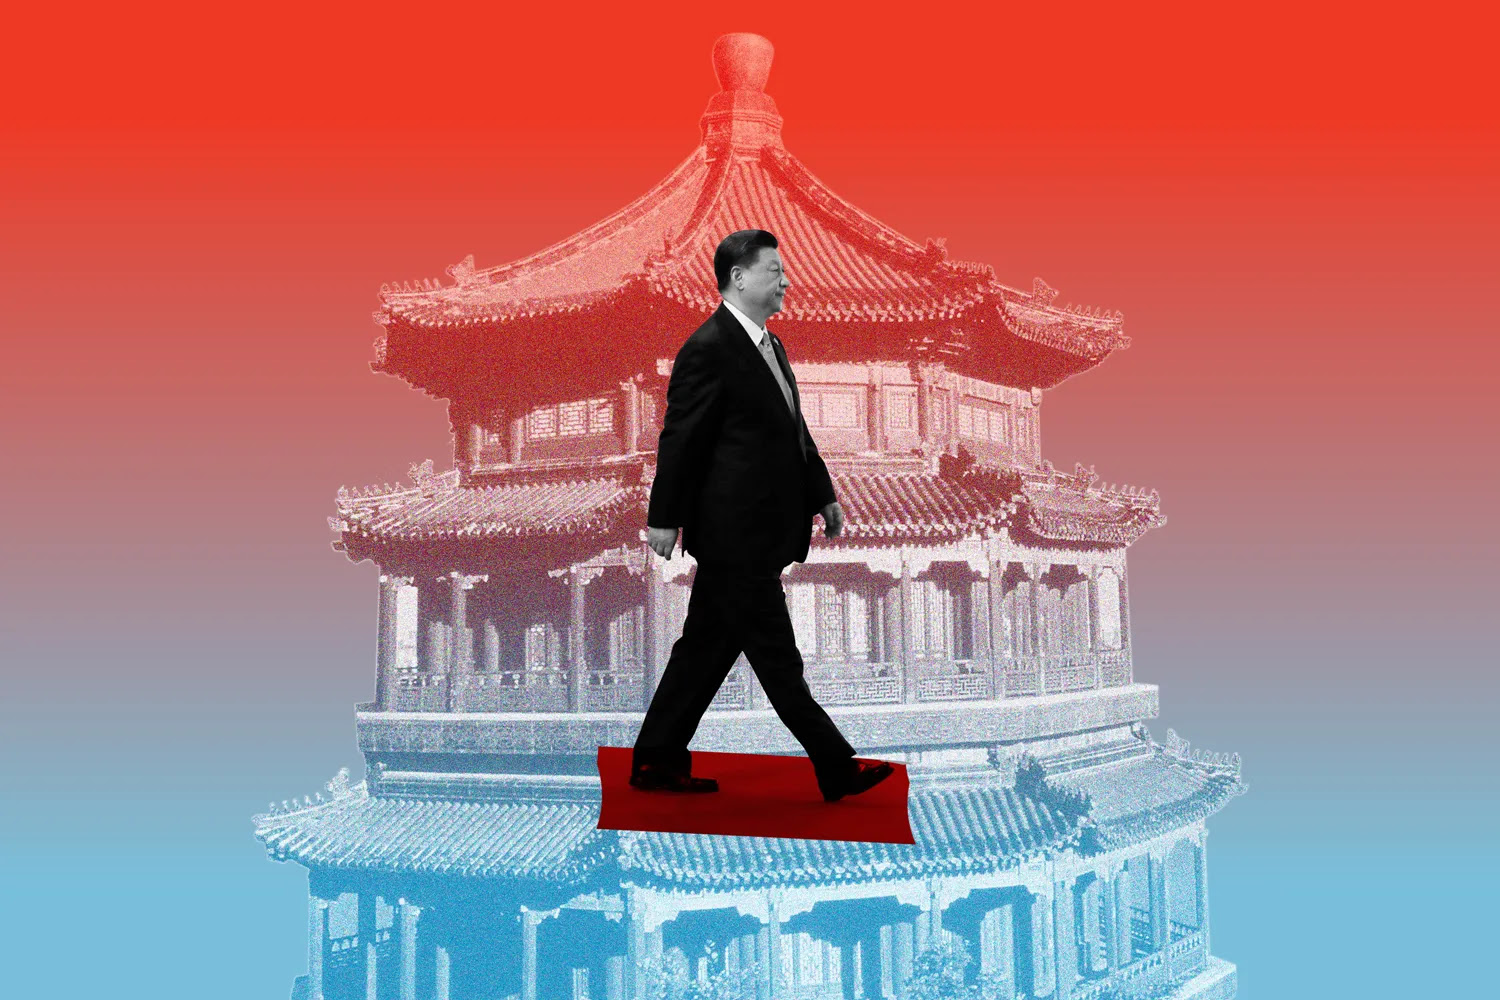 A photo illustration shows the Qing-era Summer Palace in Beijing behind an image of Chinese President Xi Jinping walking.